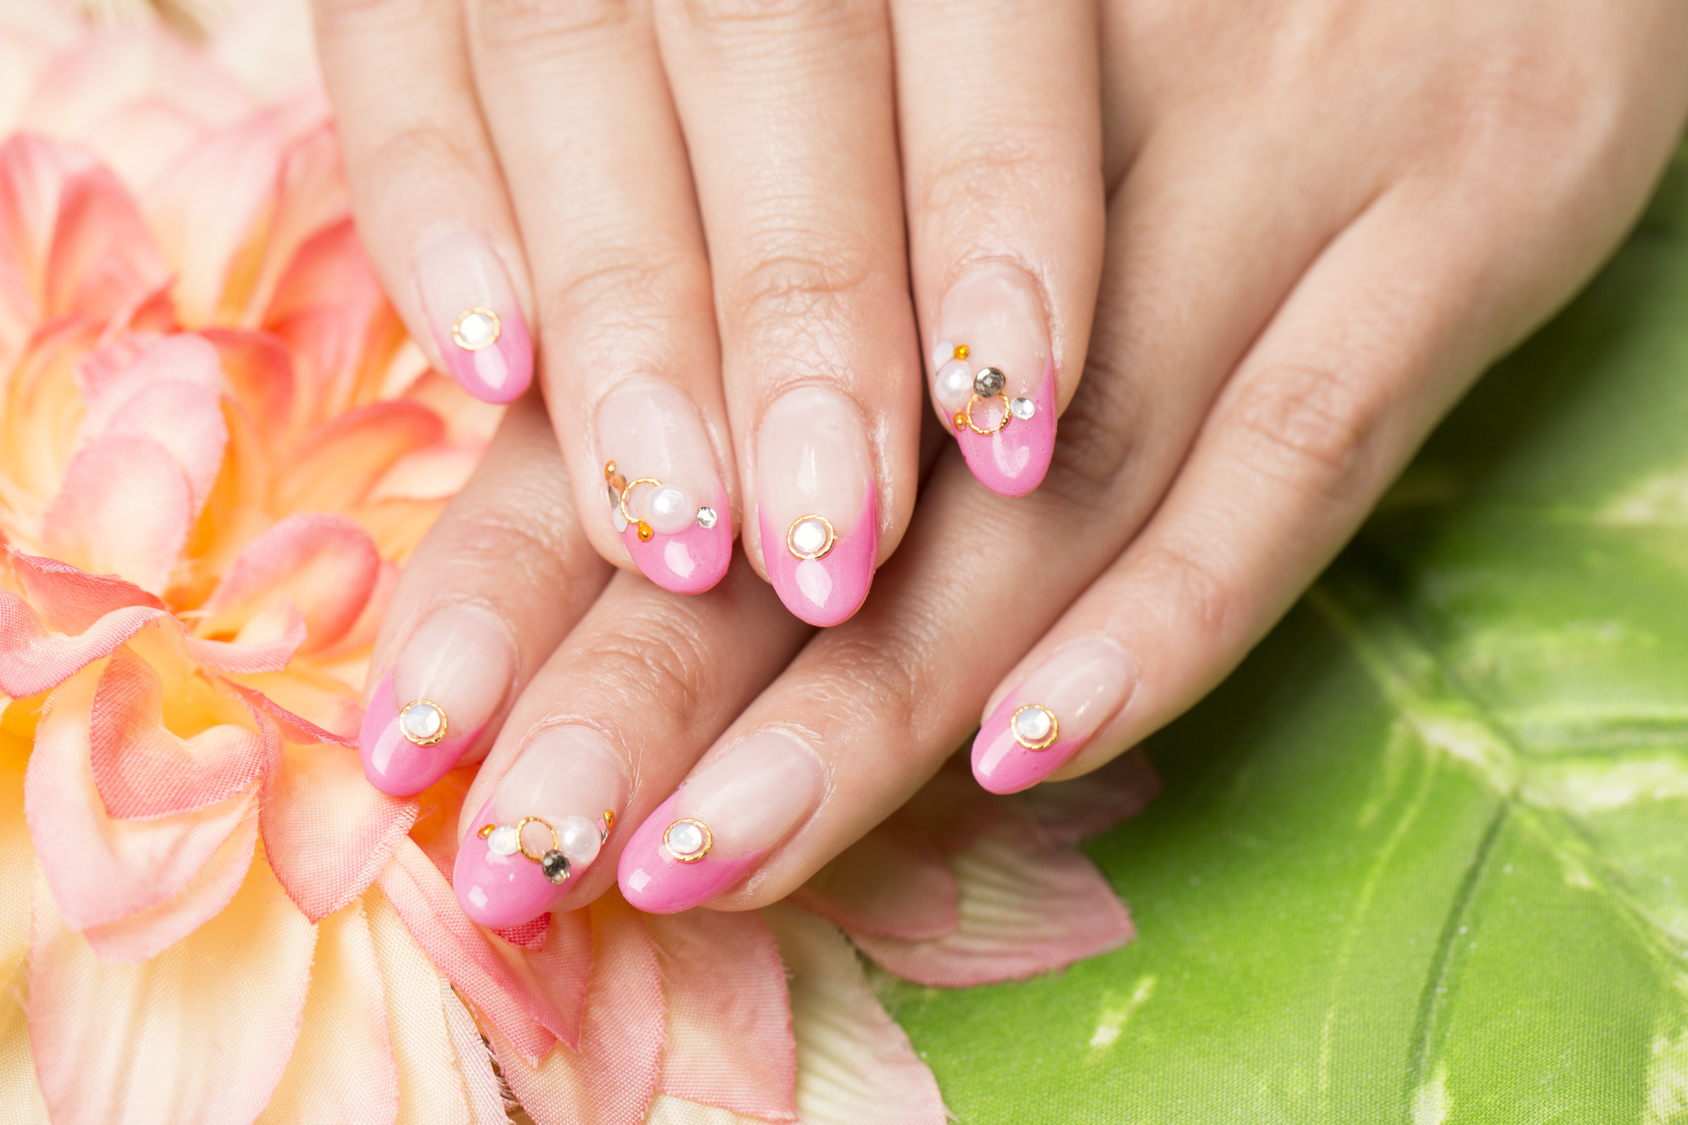 3 Things You Should Do When Applying Japanese Nail Stickers